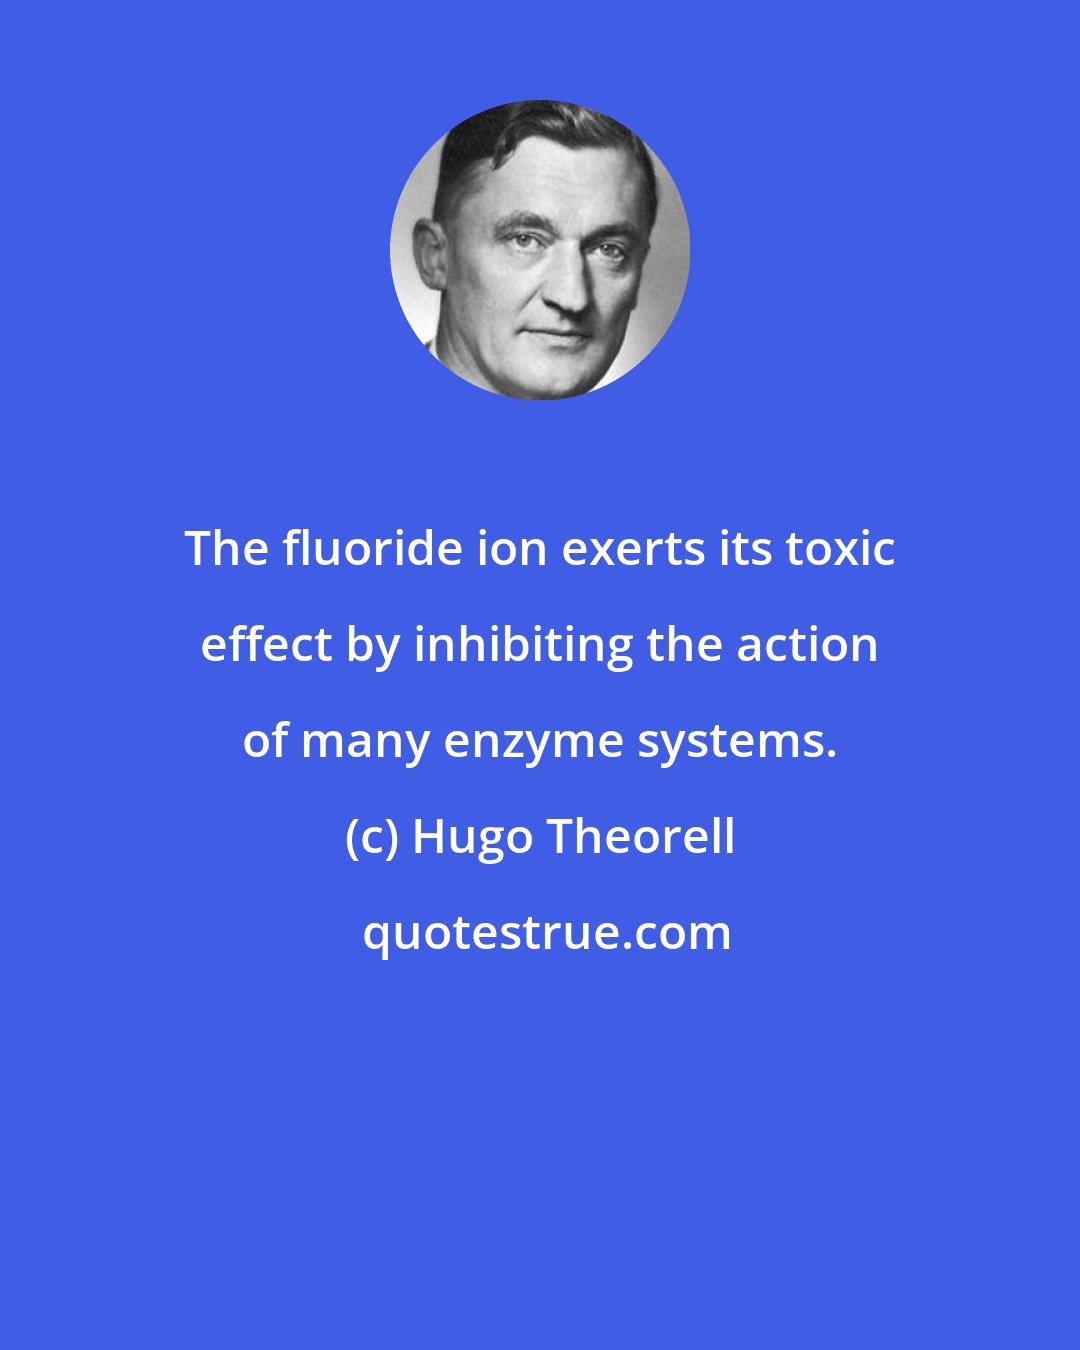 Hugo Theorell: The fluoride ion exerts its toxic effect by inhibiting the action of many enzyme systems.